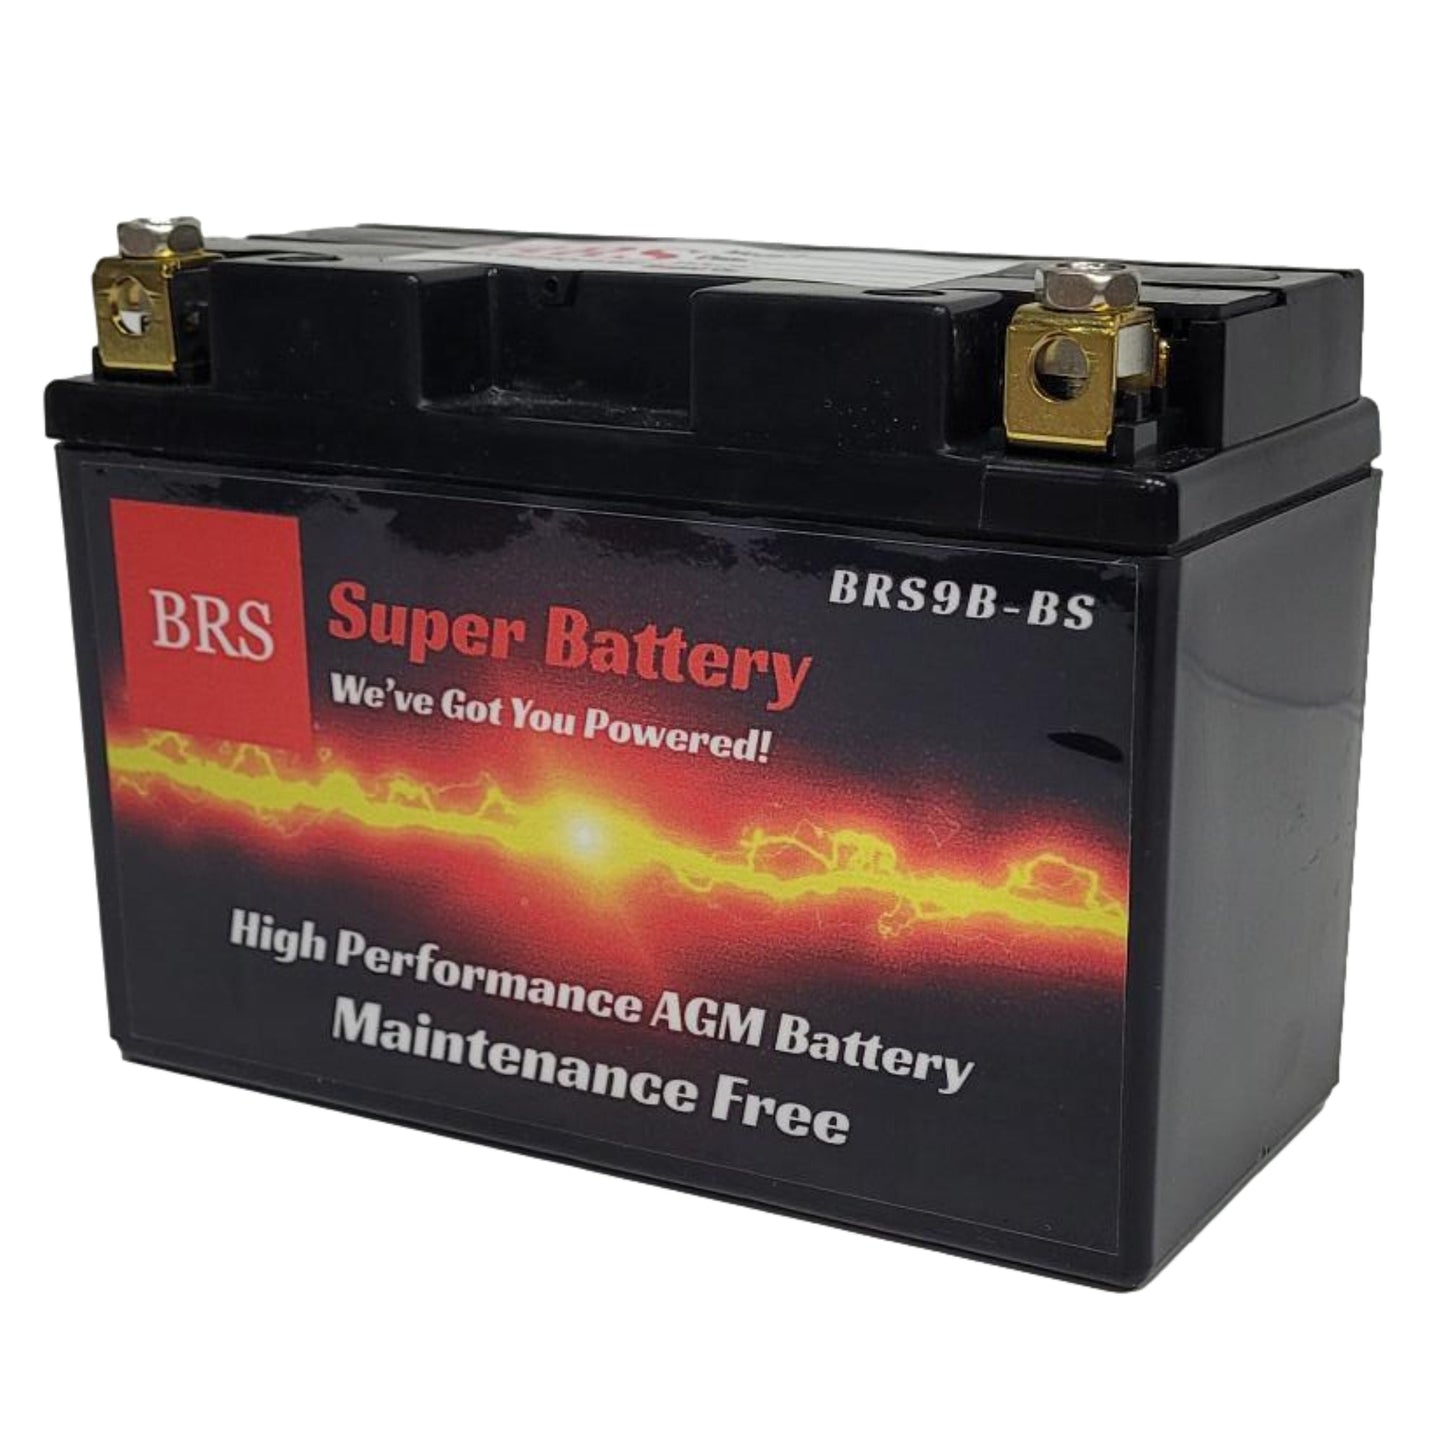 High Performance BRS9B-BS 10 Year Battery & Smart Charger / Maintainer Combo Bundle Kit 12v Sealed AGM PowerSports Battery - BRS Super Battery